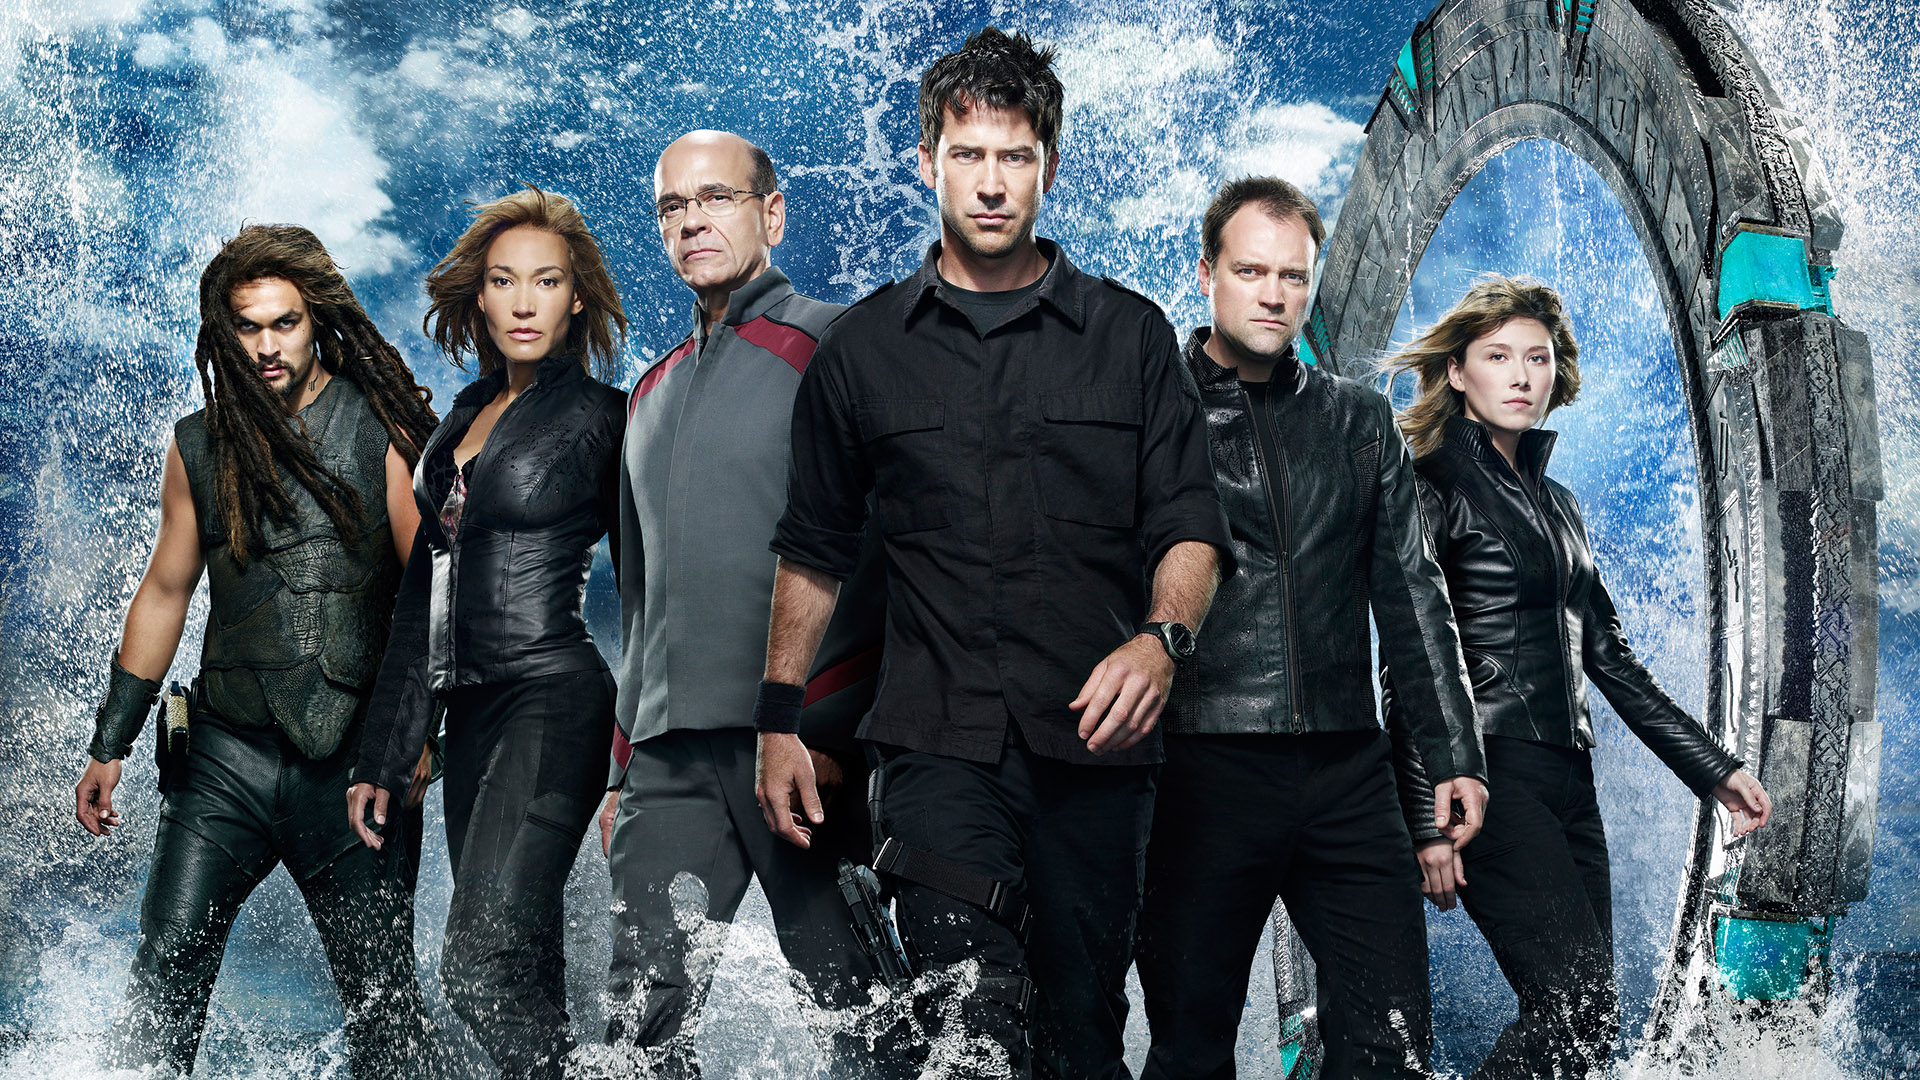 1920x1080 90+ Stargate Atlantis HD Wallpapers and Backgrounds